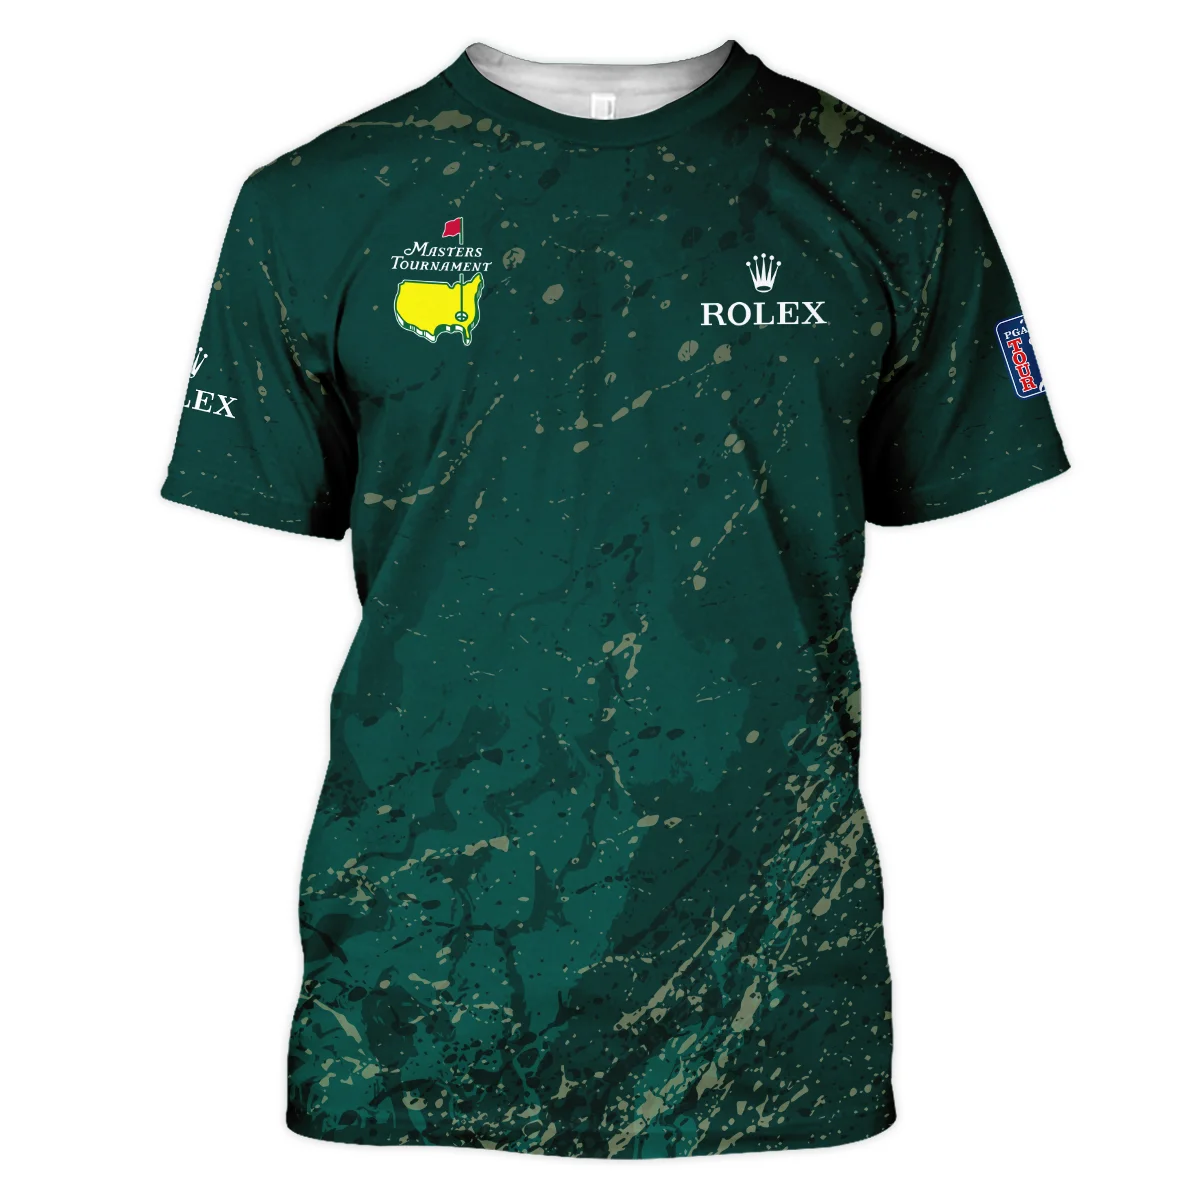 Old Cracked Texture With Gold Splash Paint Masters Tournament Rolex Unisex T-Shirt Style Classic T-Shirt